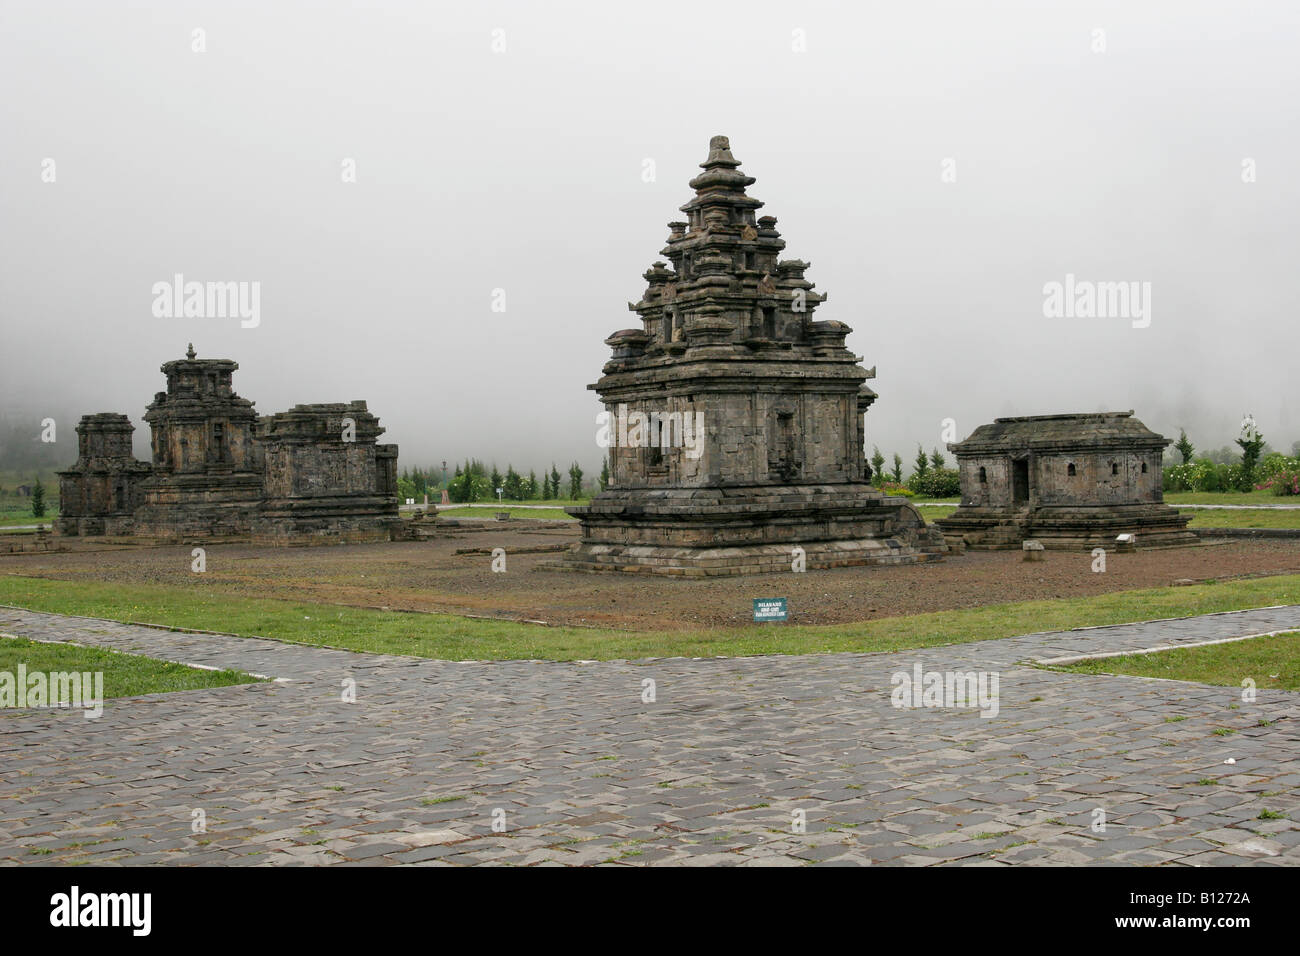 Hindu temples of Dieng Plateau, Java, Indonesia Stock Photo